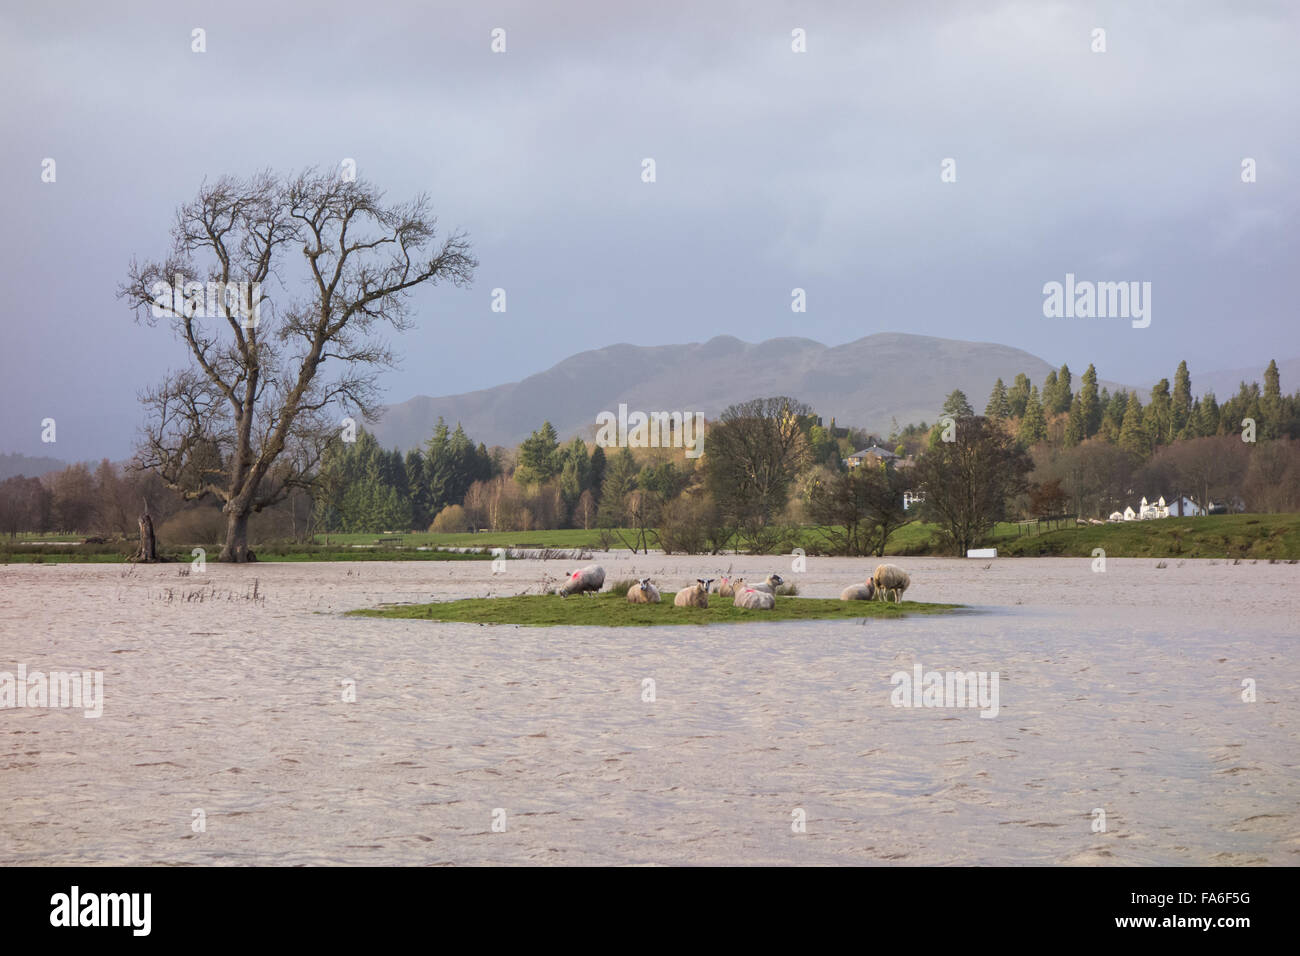 Flooded Fields    Drymen, Scotland, UK - 22 December 2015: UK weather.  Sheep stranded on an island surrounded by flooded fields in the Drymen Show Field, where the annual Stirling Agricultural Society Drymen Show is held. Credit:  kayrtravel/Alamy Live News Stock Photo